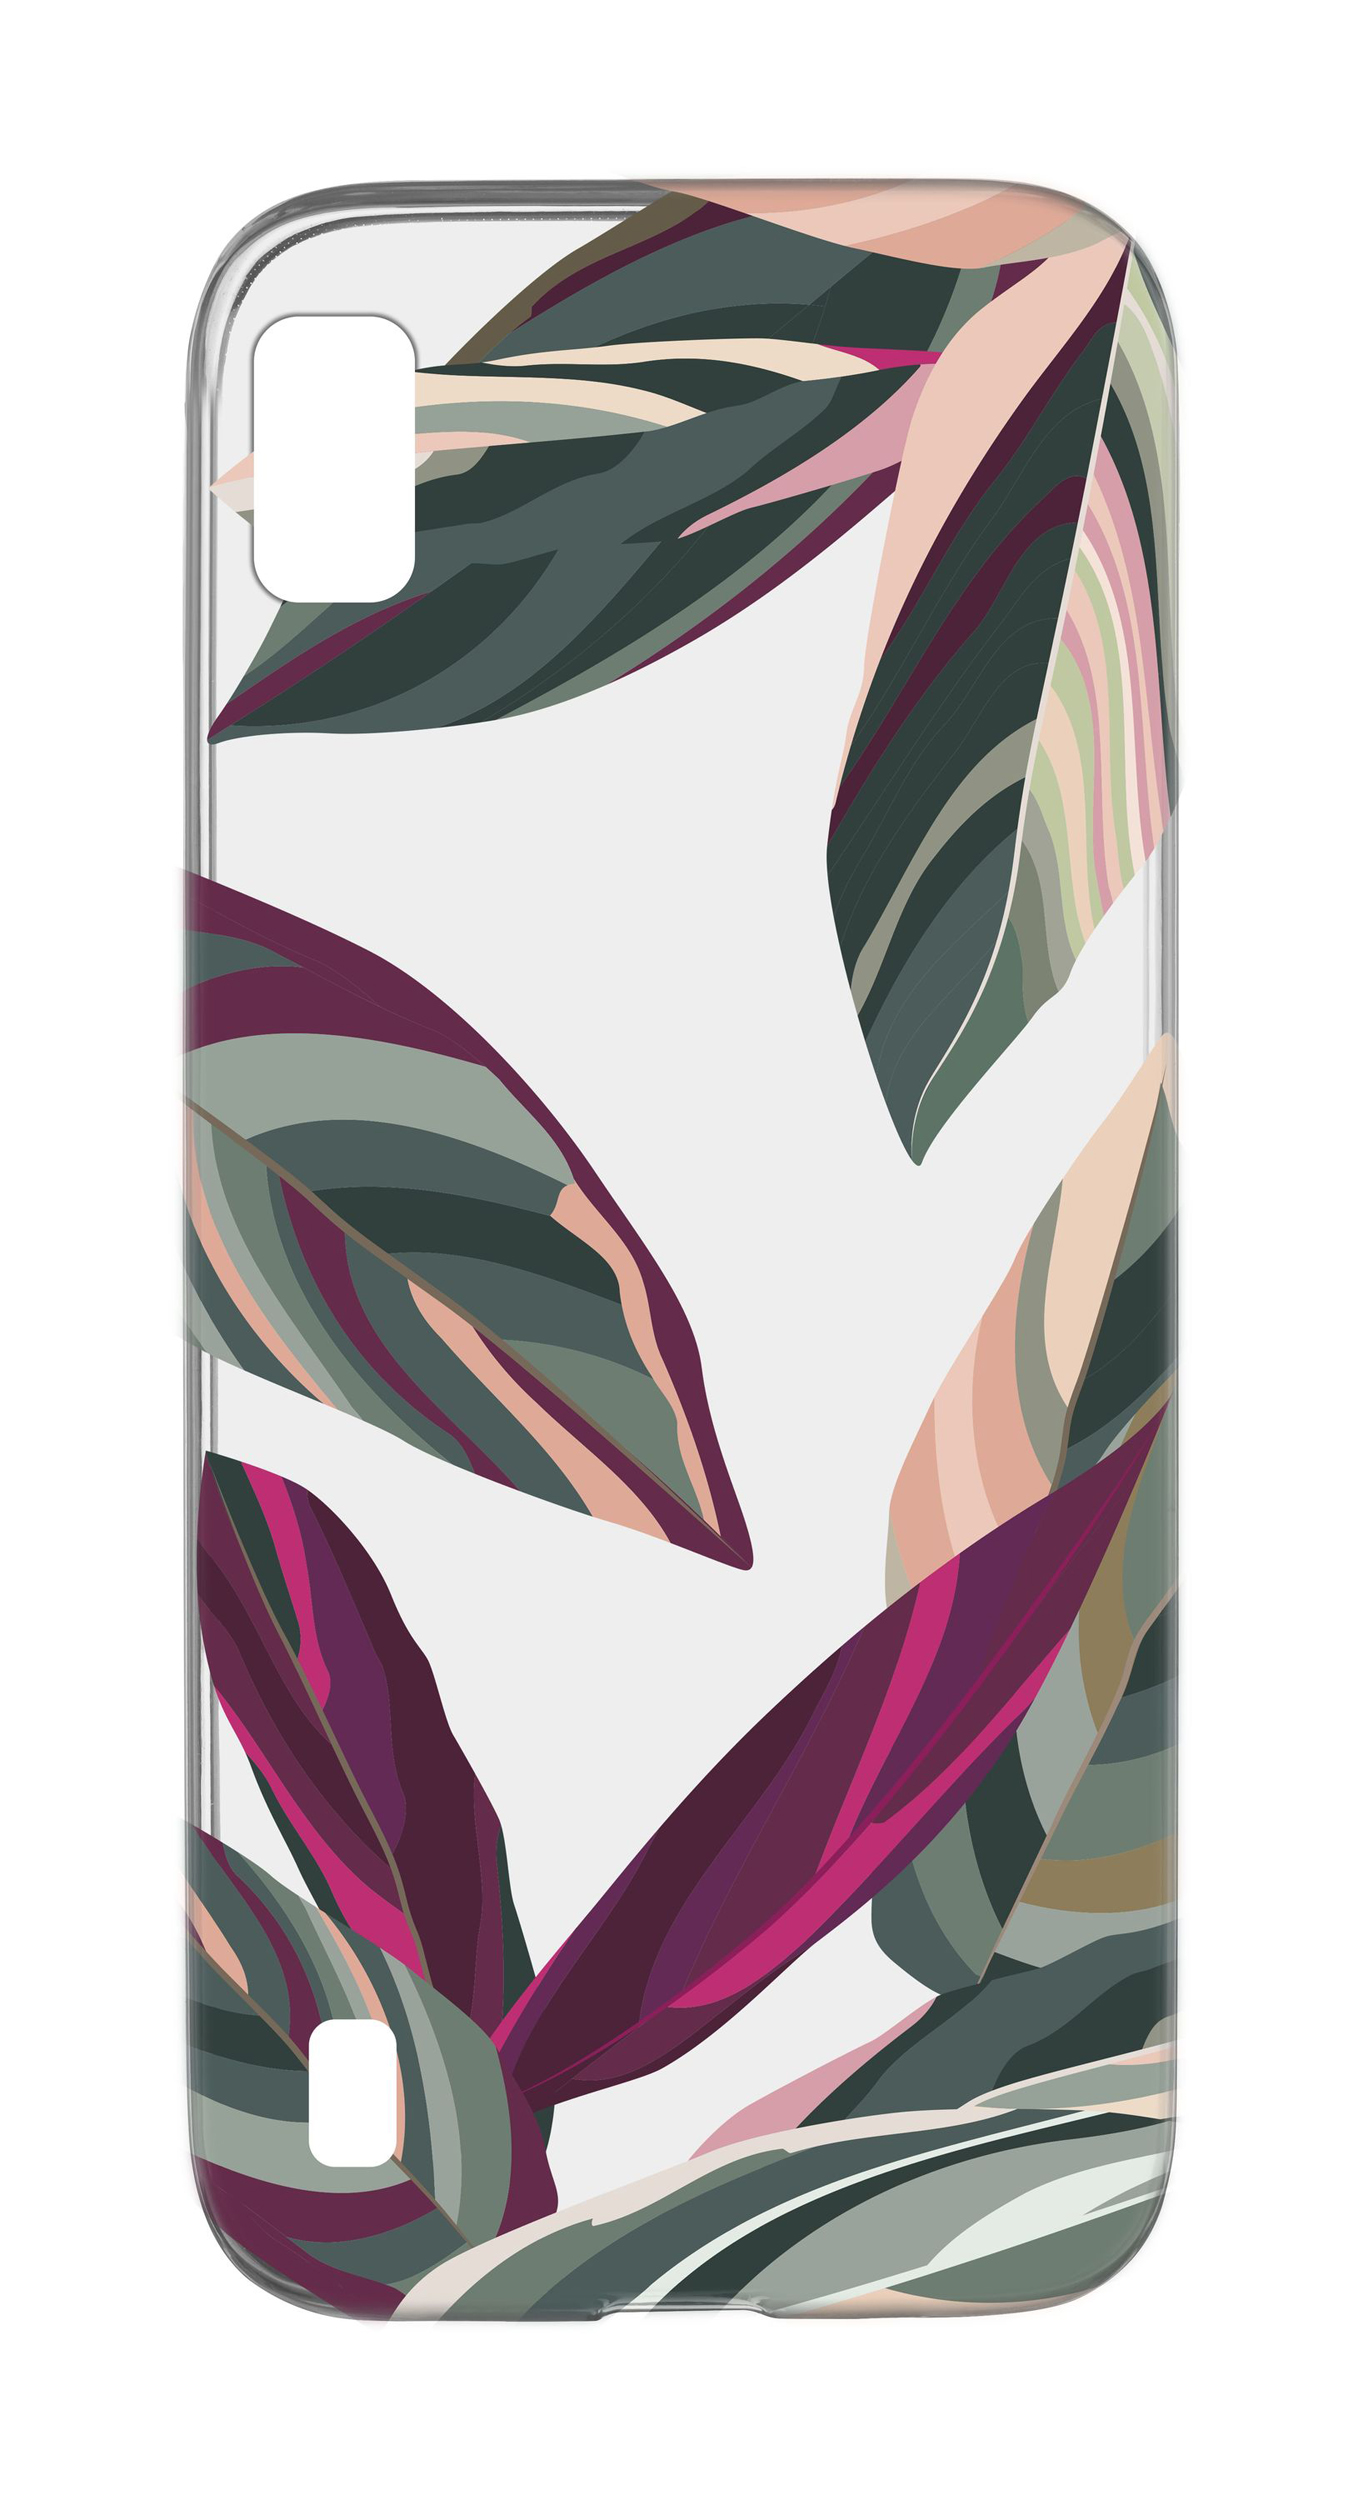 Samsung Galaxy A10, case style, forest